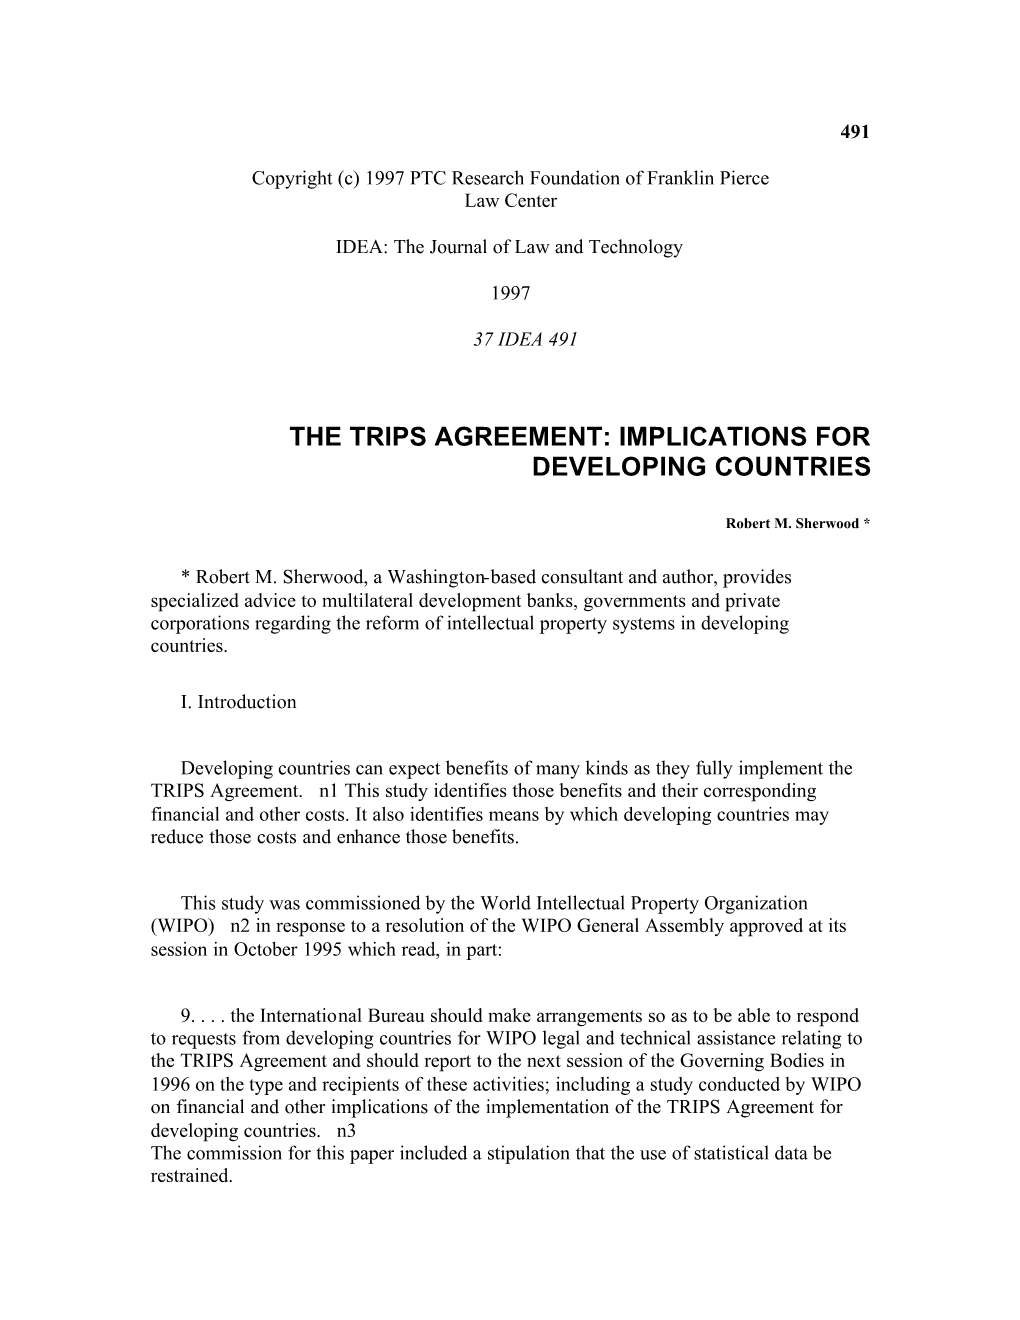 The Trips Agreement: Implications for Developing Countries